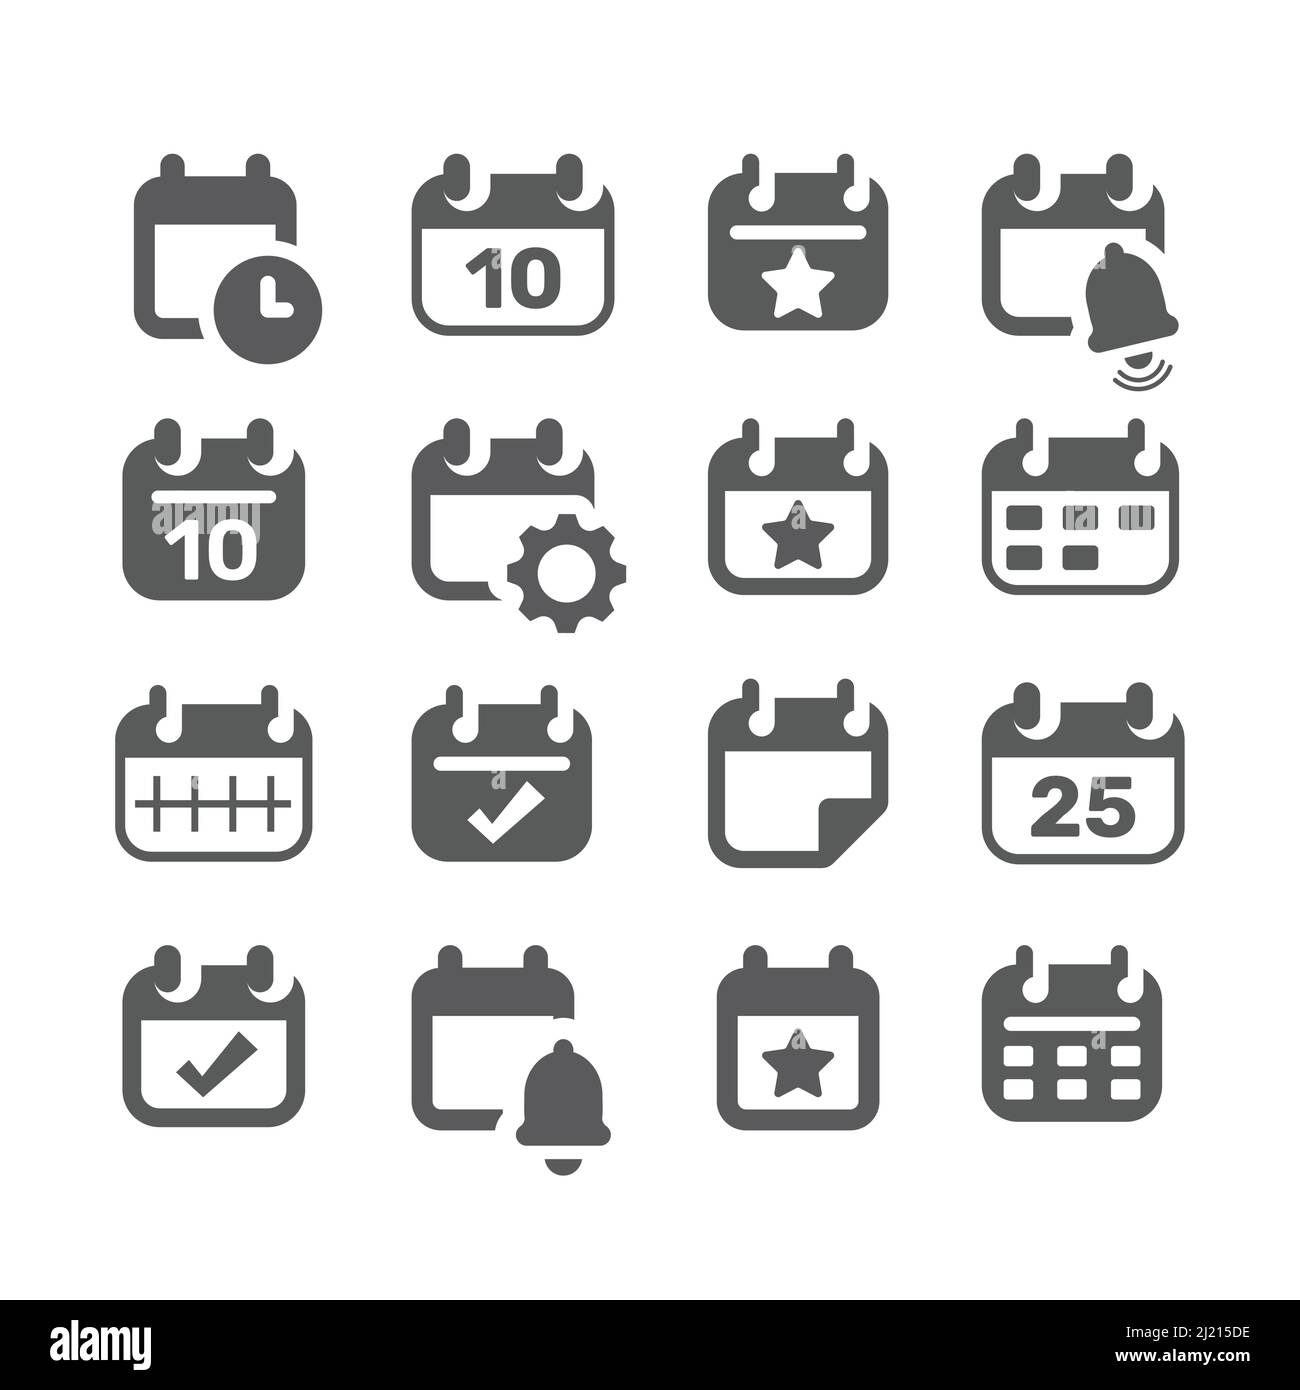 Calendar page black vector icon set. Date schedule filled icons. Stock Vector